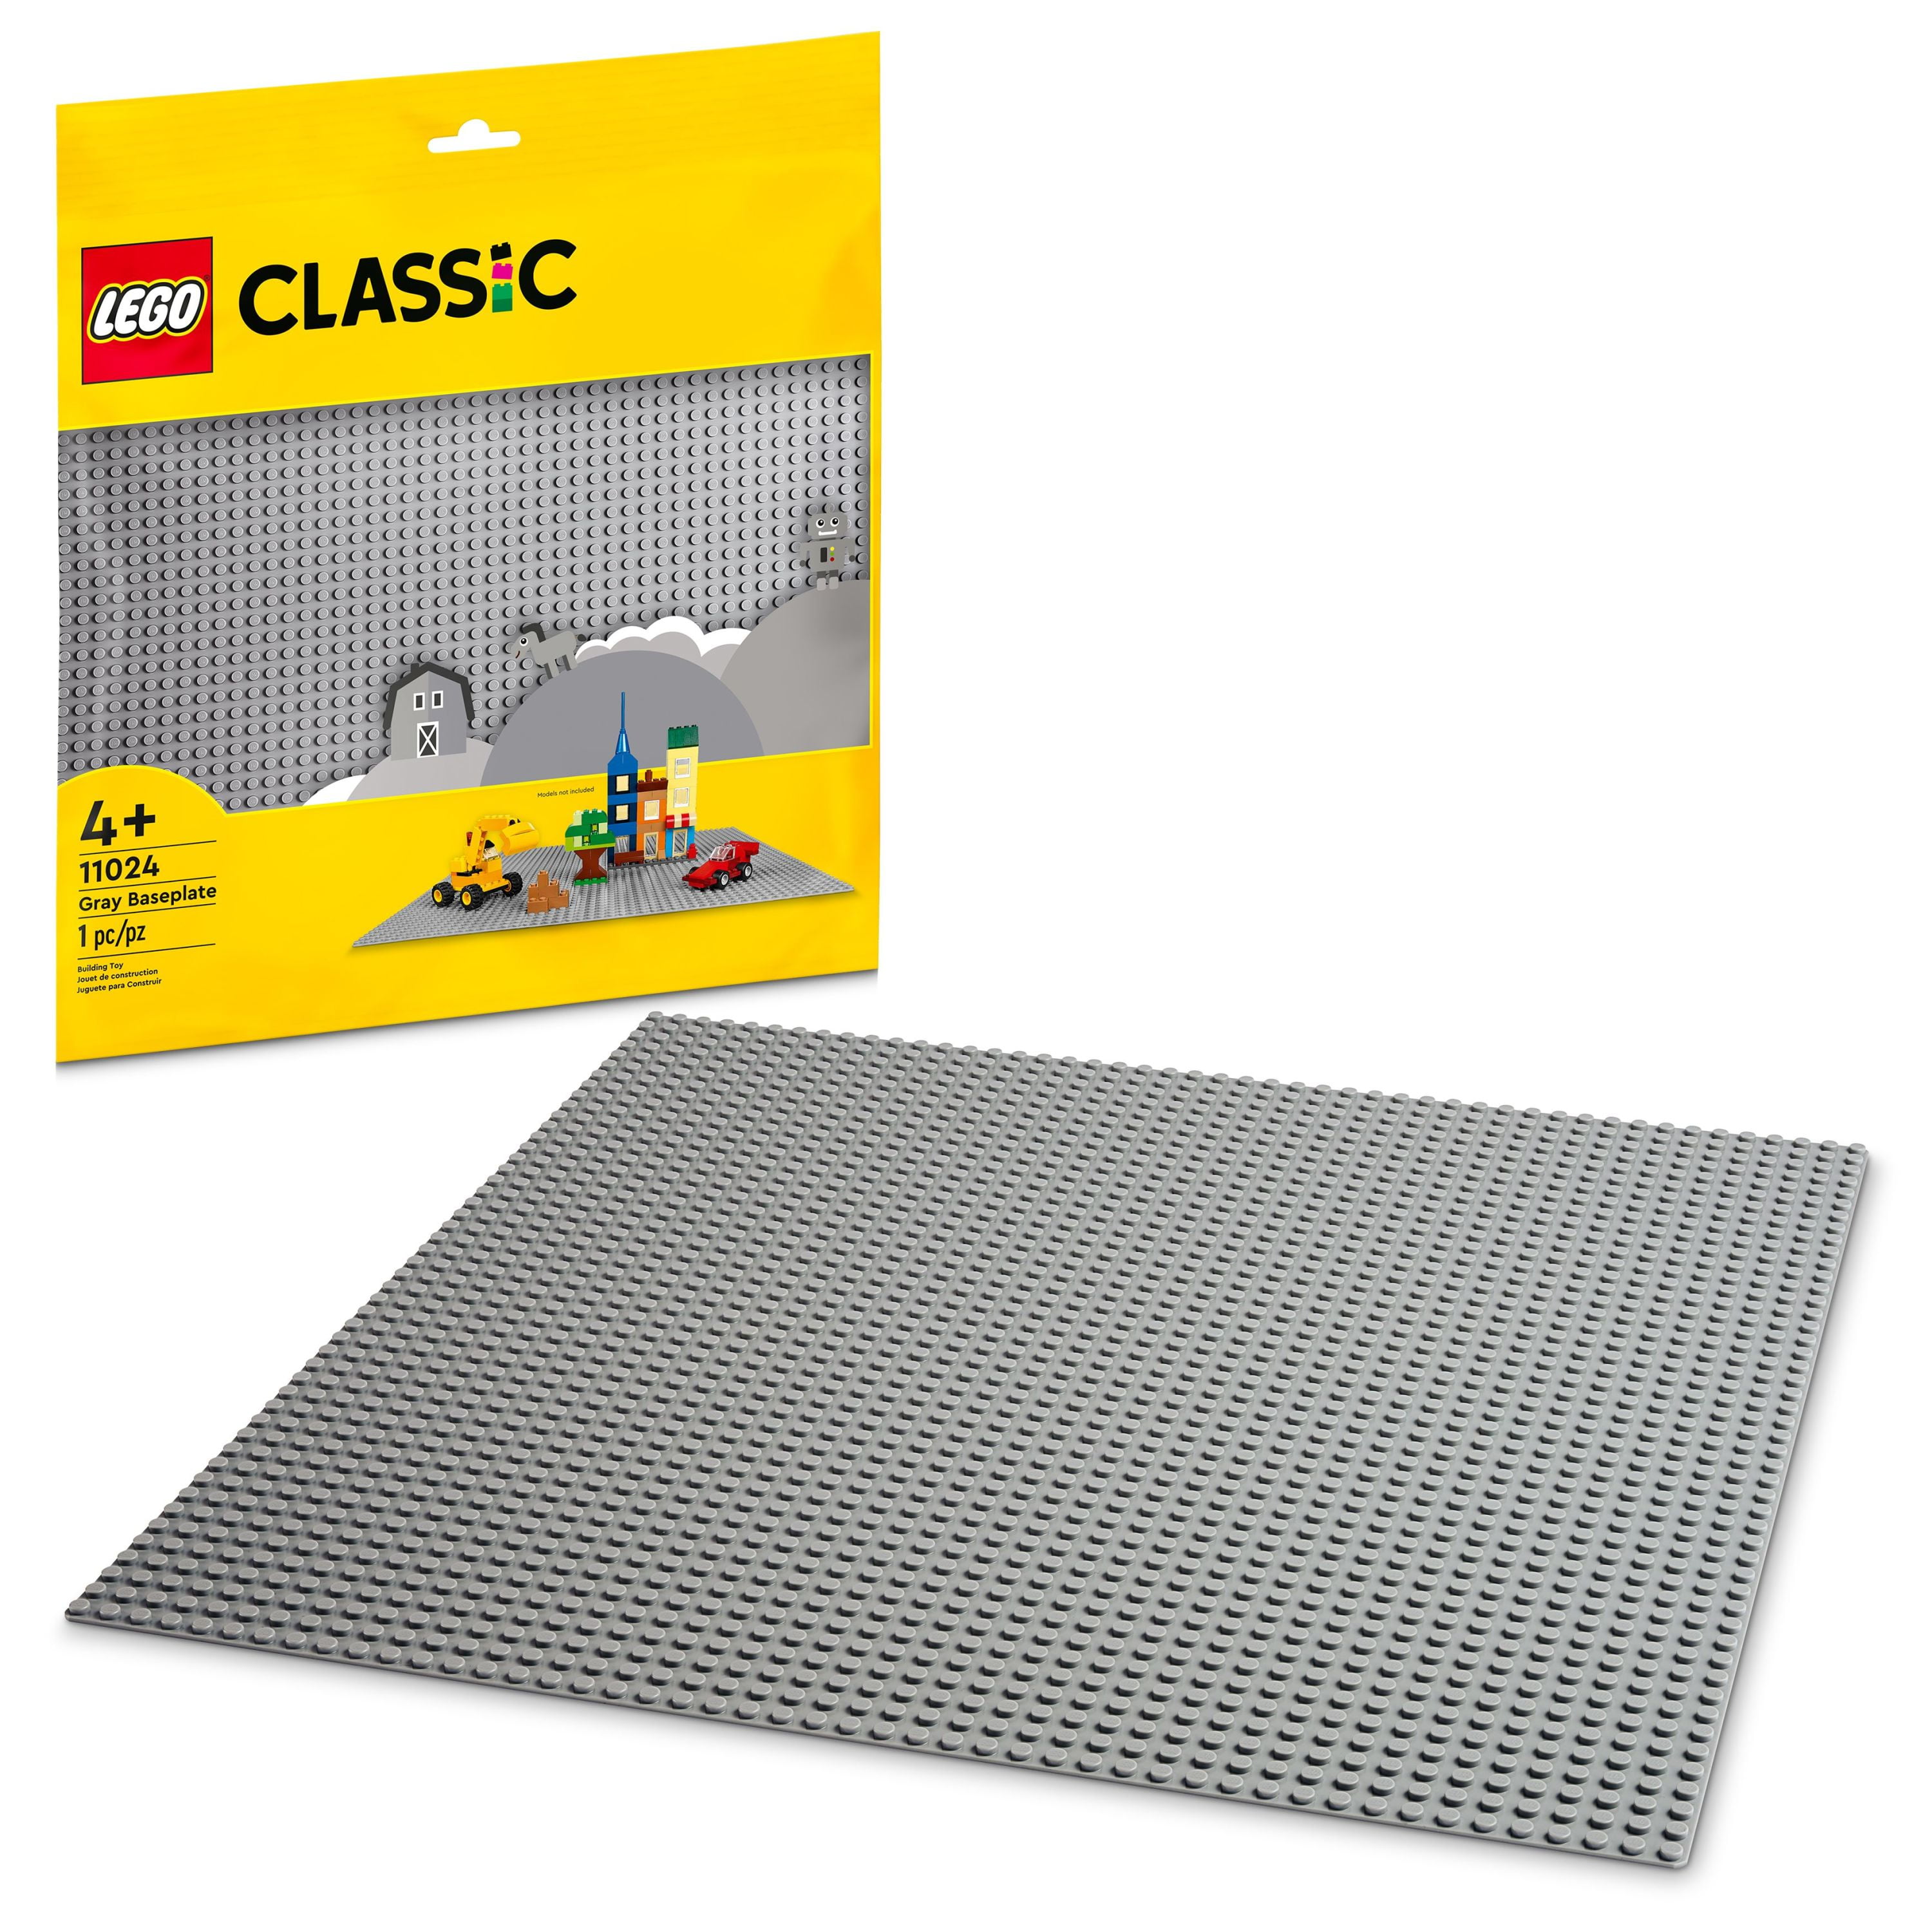 uendelig eksistens Benign LEGO Classic Gray Baseplate 11024 Building Kit; Square 48x48 Landscape for  Open-Ended Imaginative Building Play; Can Be Given as a Birthday, Holiday  or Any-Day Gift for Kids Aged 4 and up (1